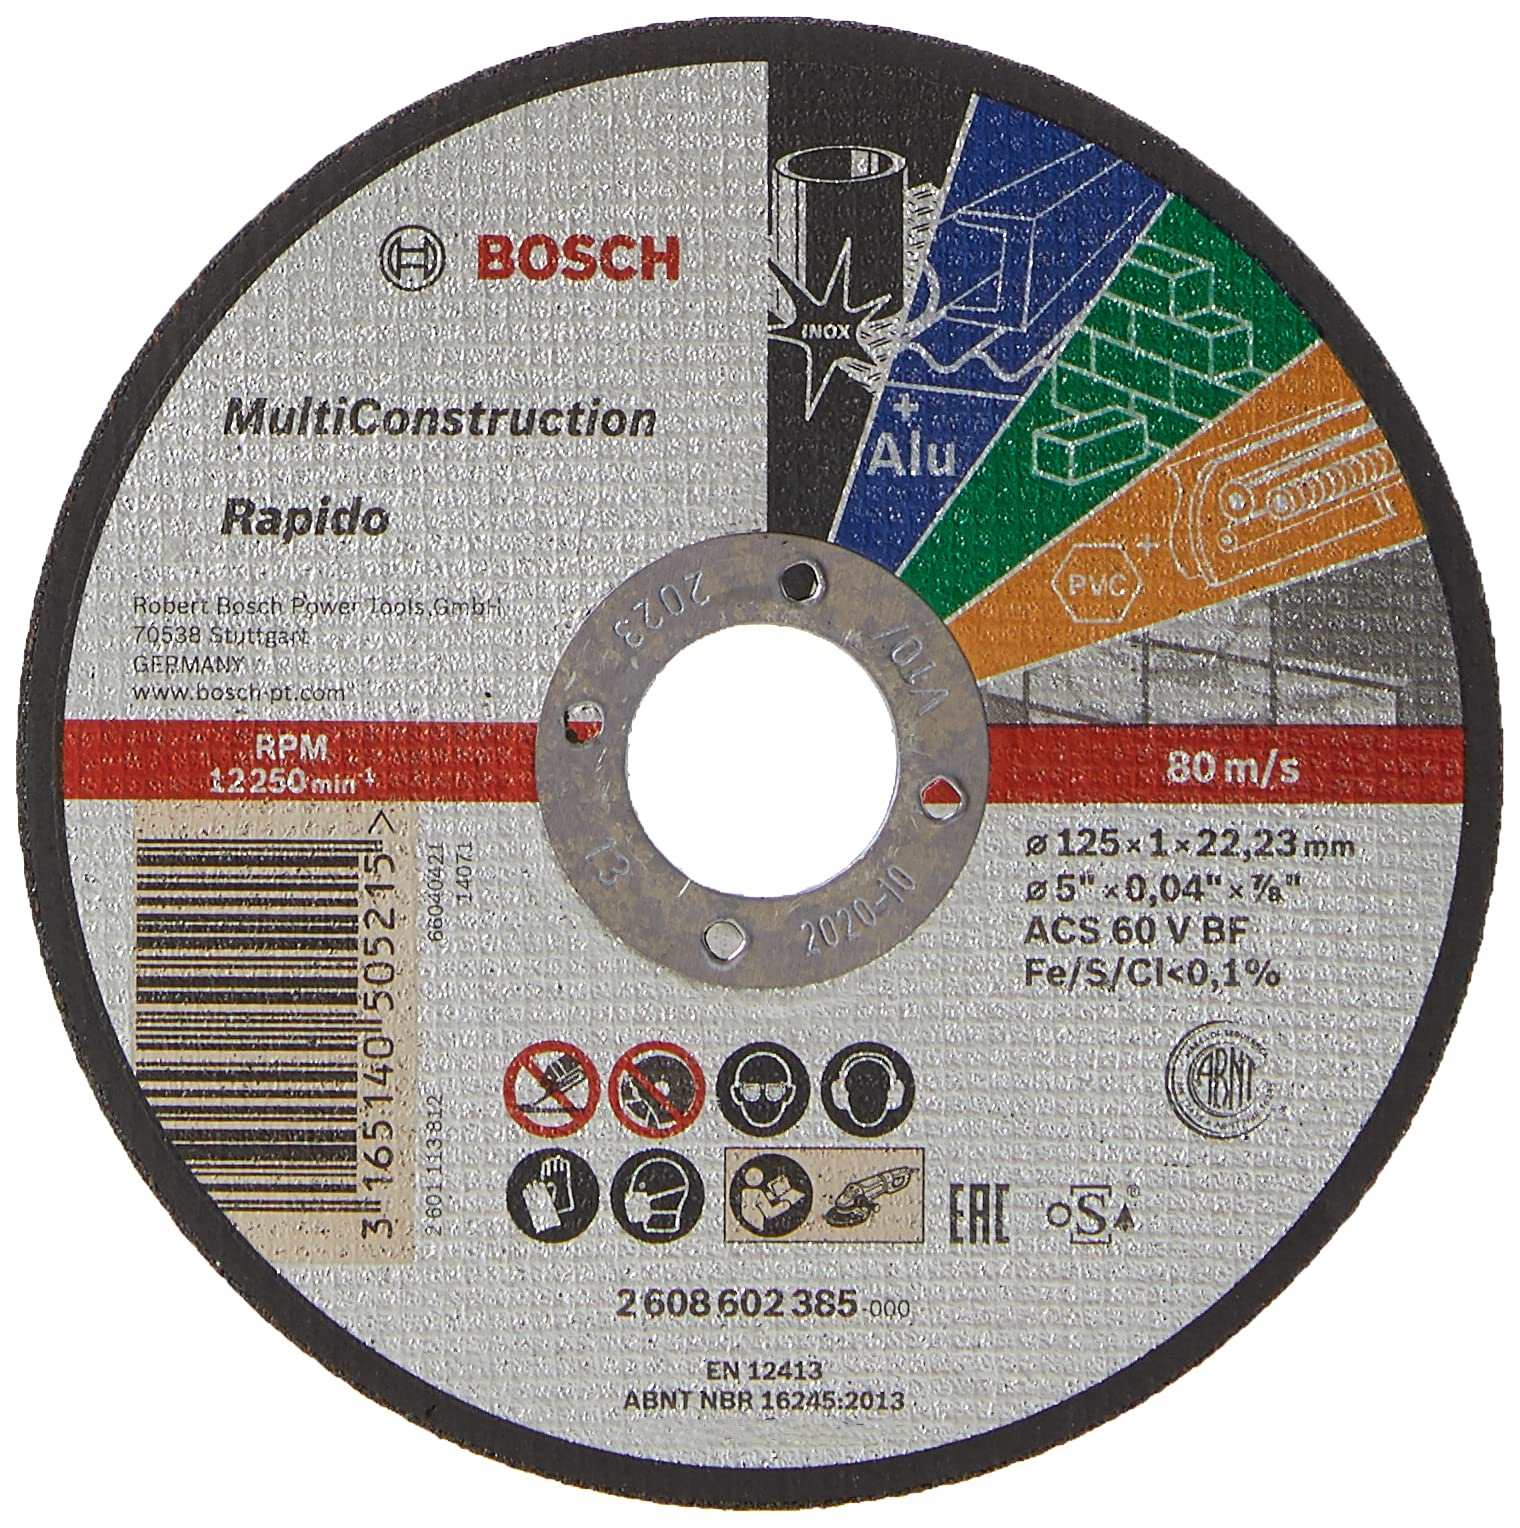 Bosch 125Mm Multi-Construction Cutting Disc 2608602385 Power Tool Services